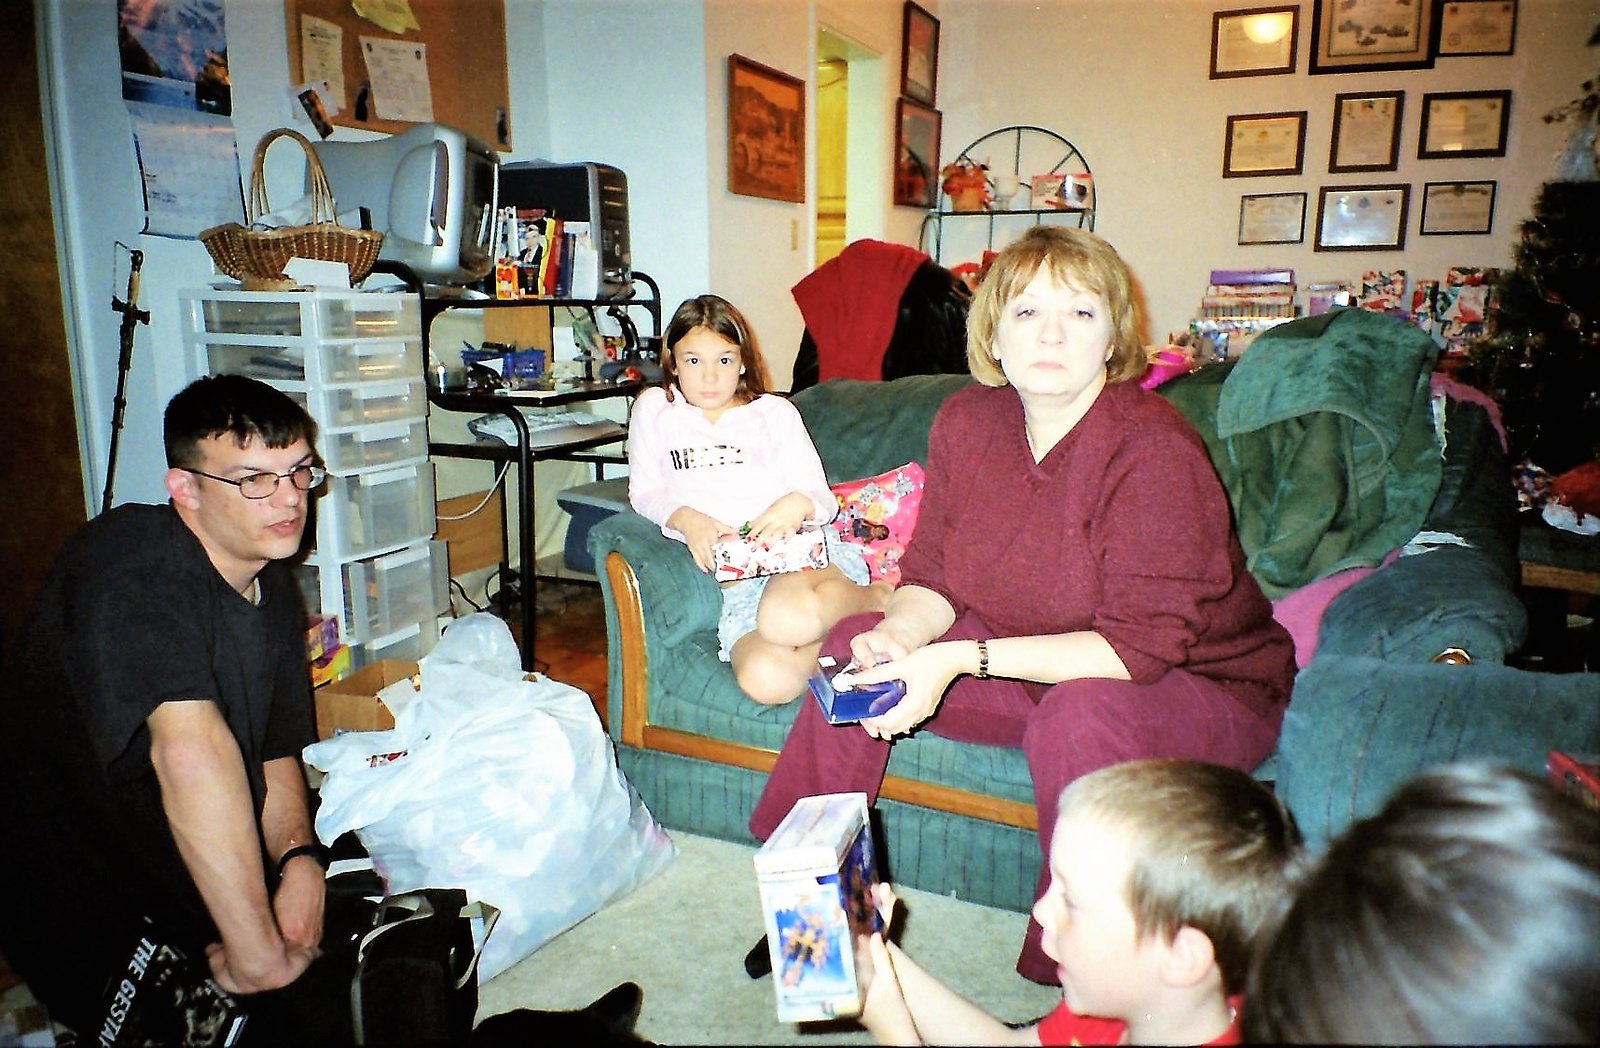 Family members watching their little boy open his Christmas present | Source: Flickr